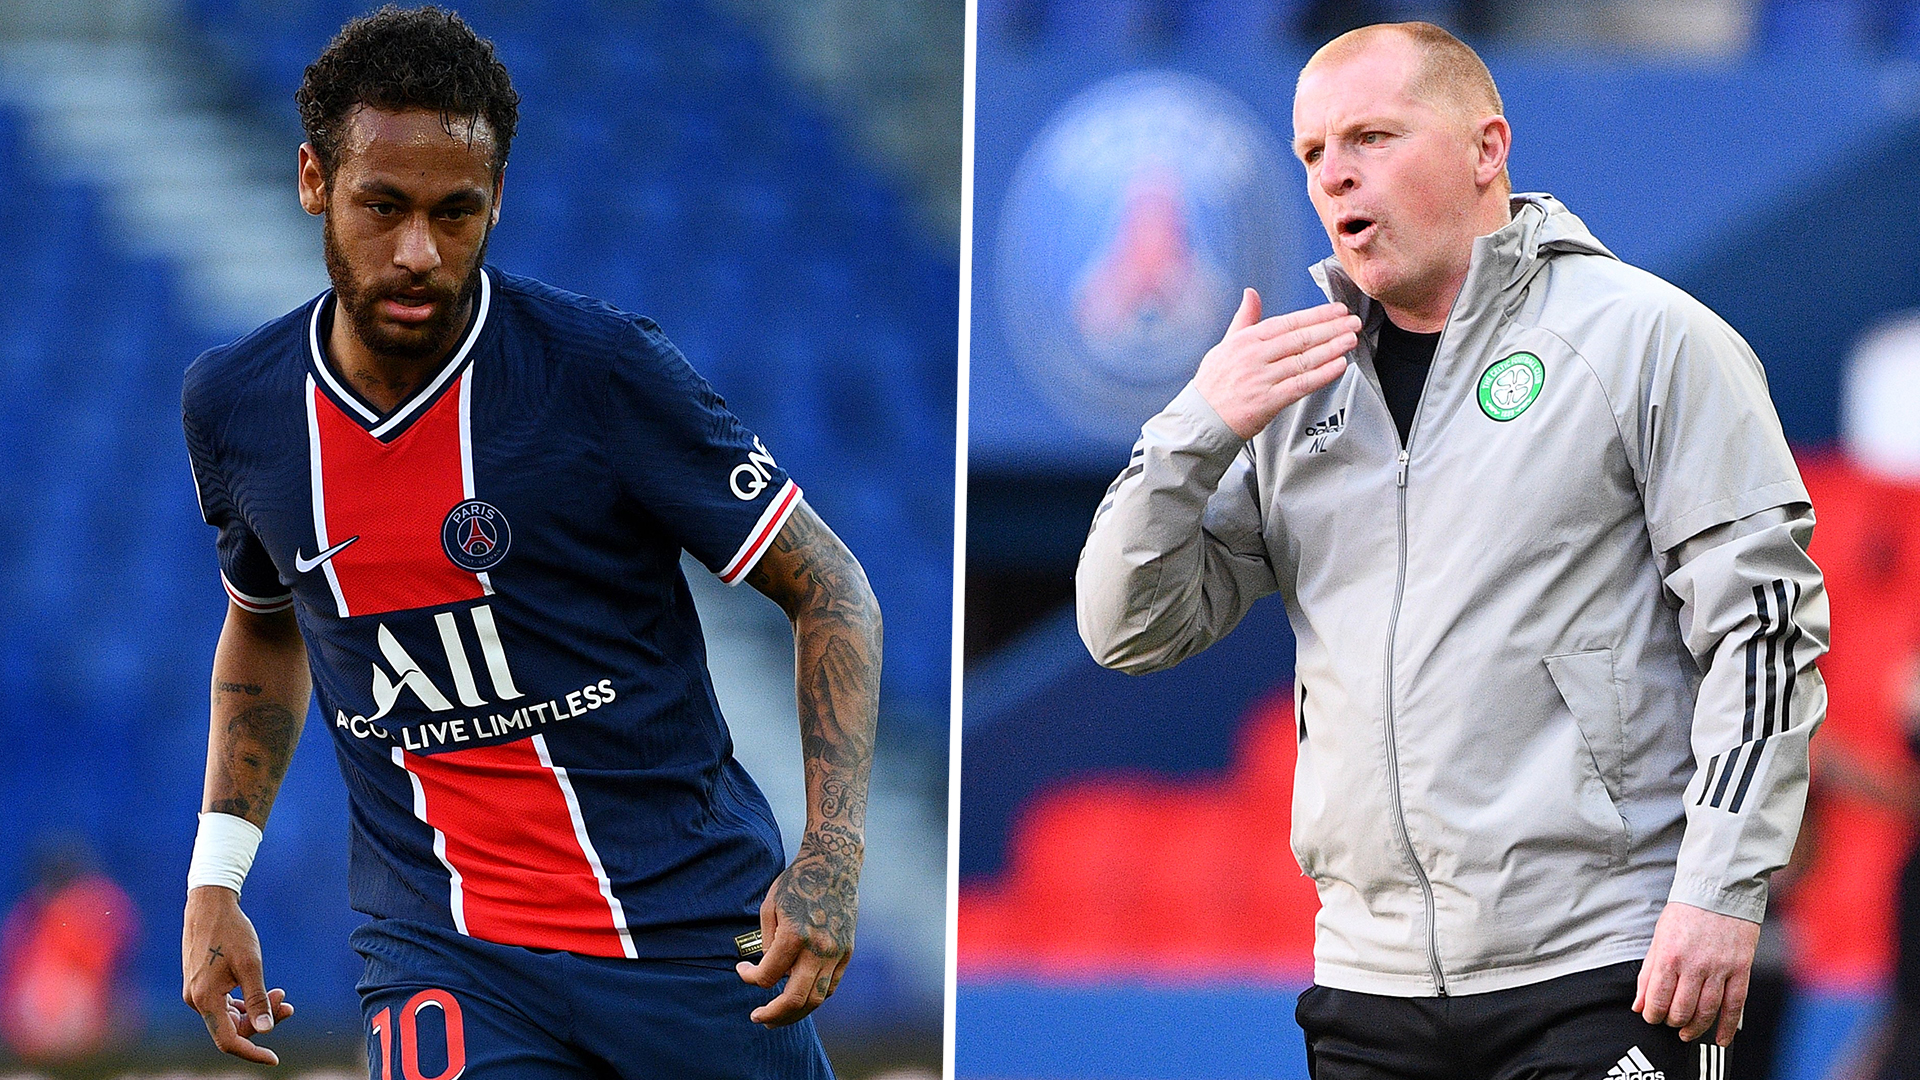 'Neymar's always trying to wind people up!' - Lennon reacts after clashing with PSG star in Celtic friendly loss